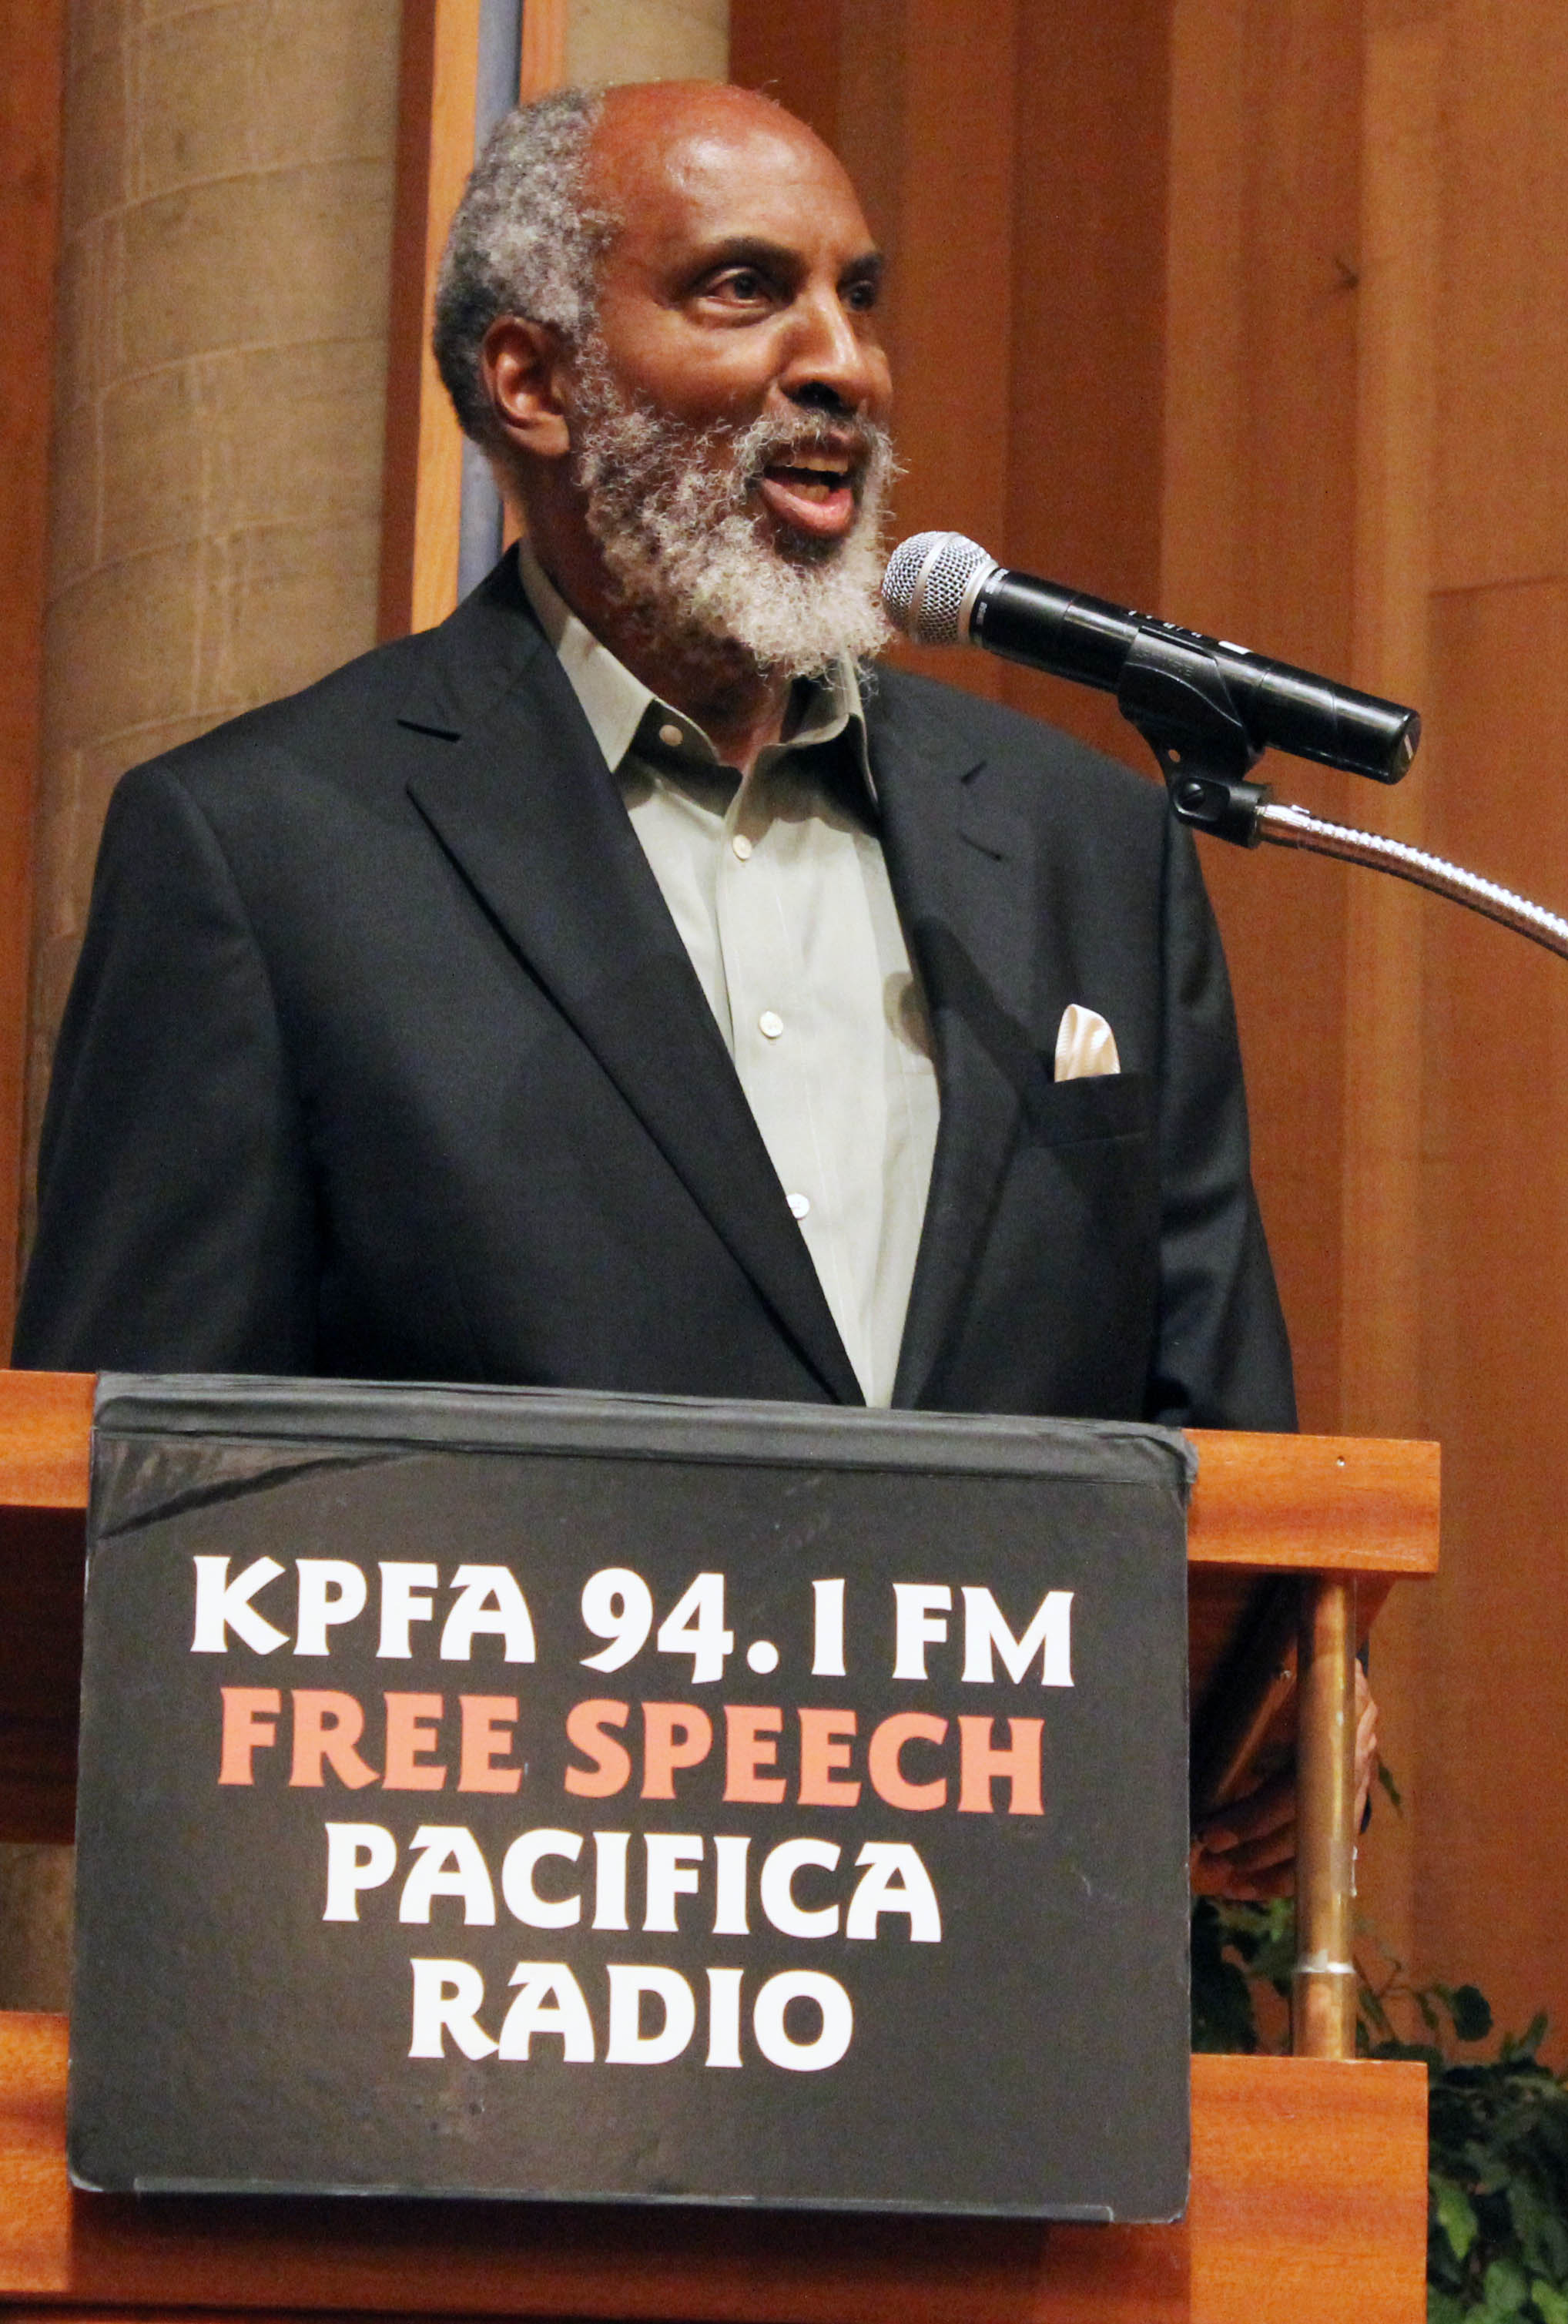 Prof. john a. powell, director of the Haas Institute for a Fair and Inclusive Society.